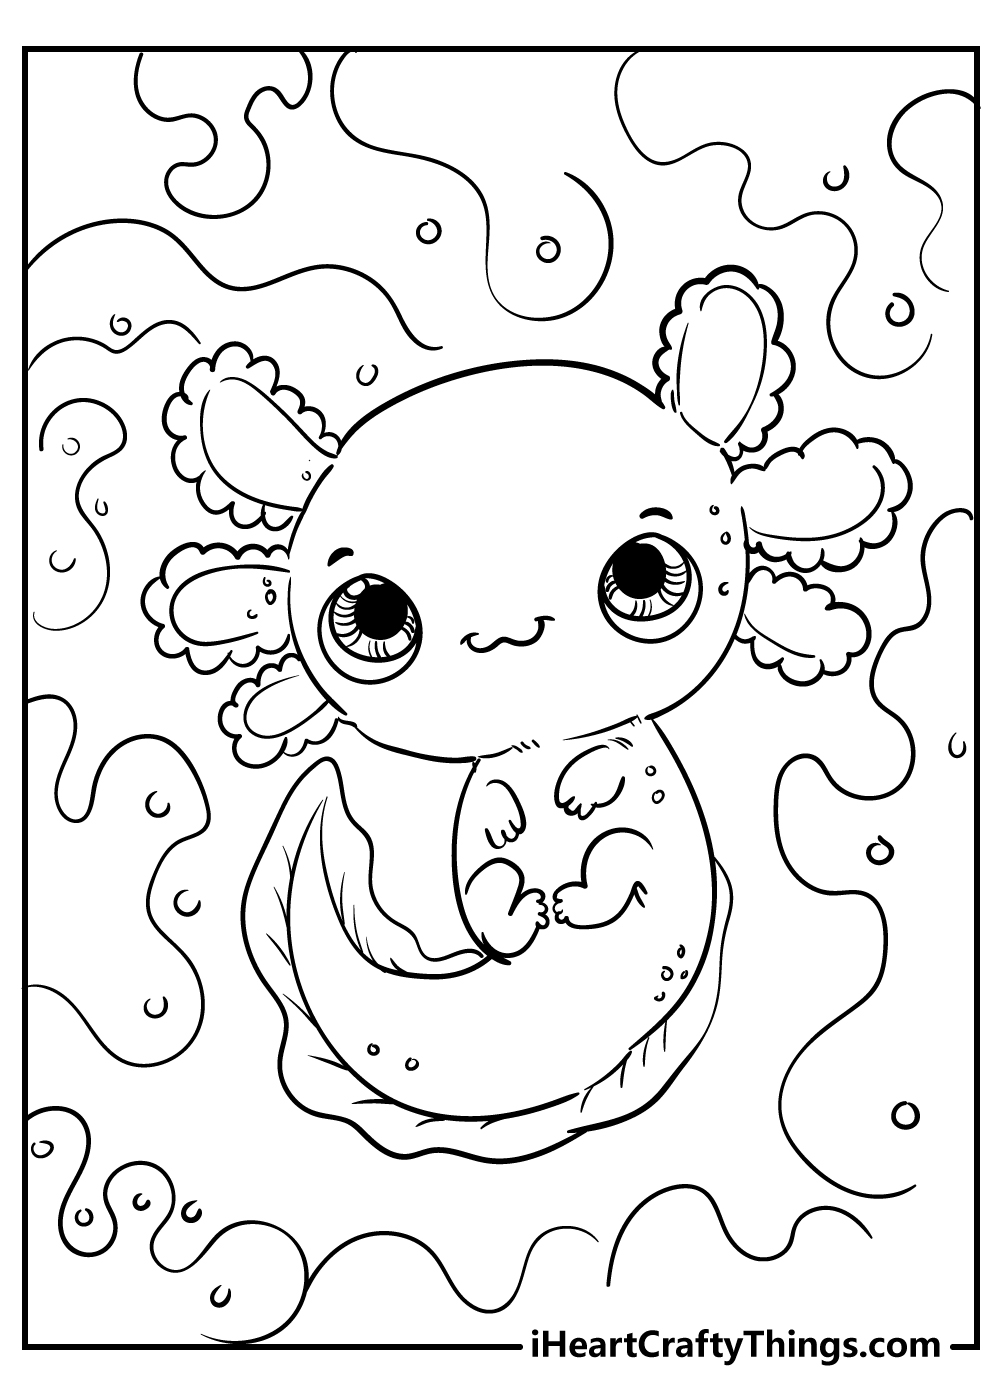 cute axolotl animal coloring pages free download